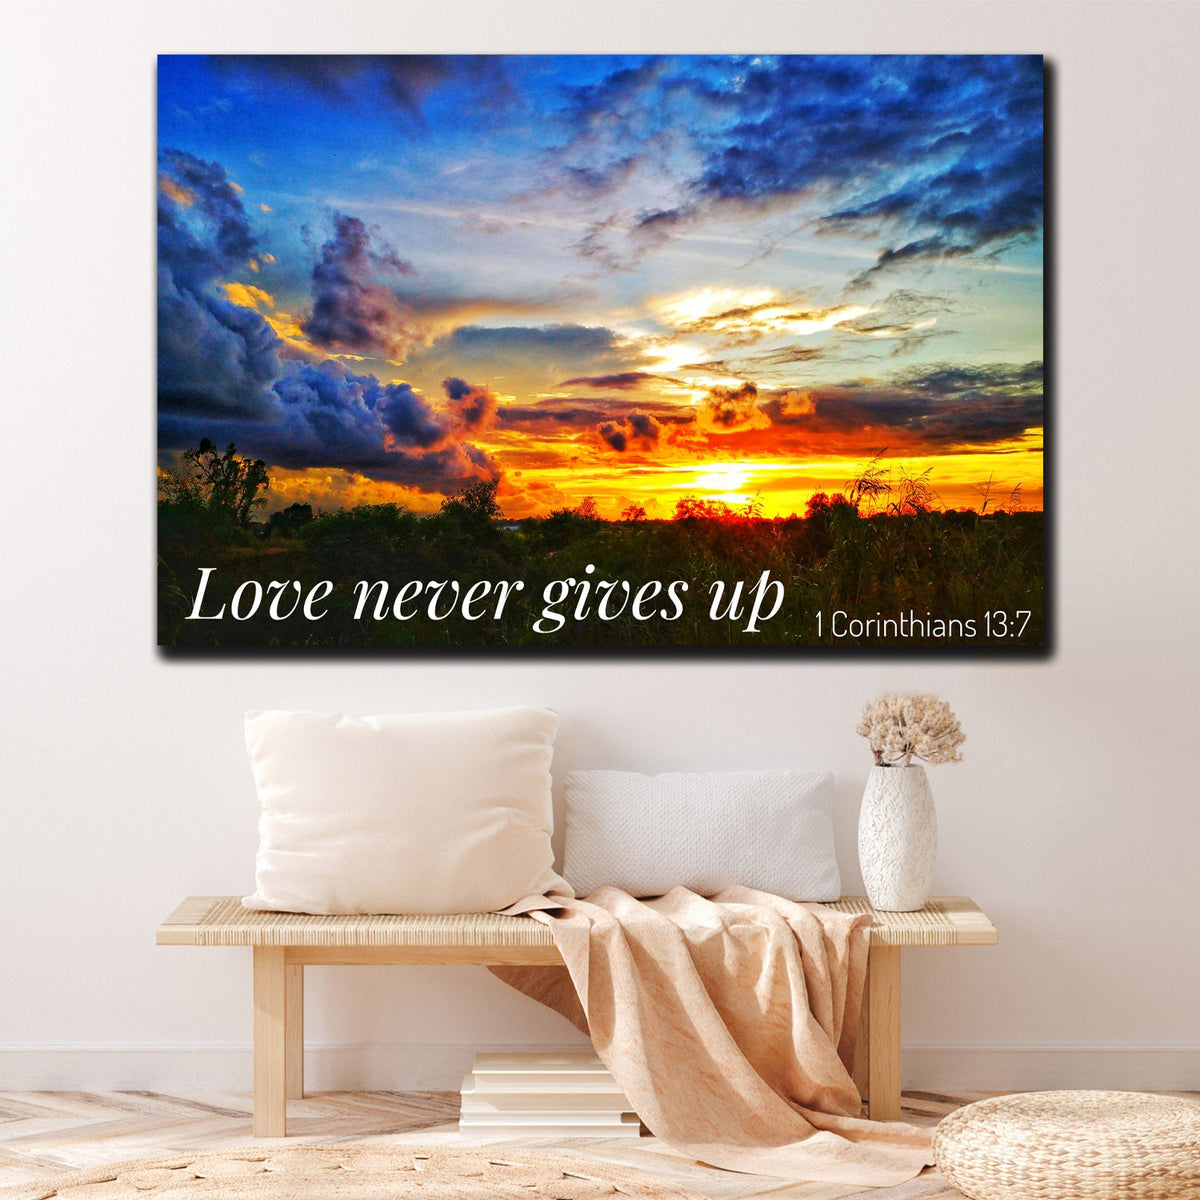 https://cdn.shopify.com/s/files/1/0387/9986/8044/products/LoveNeverGivesUpCanvasArtprintStretched-3.jpg